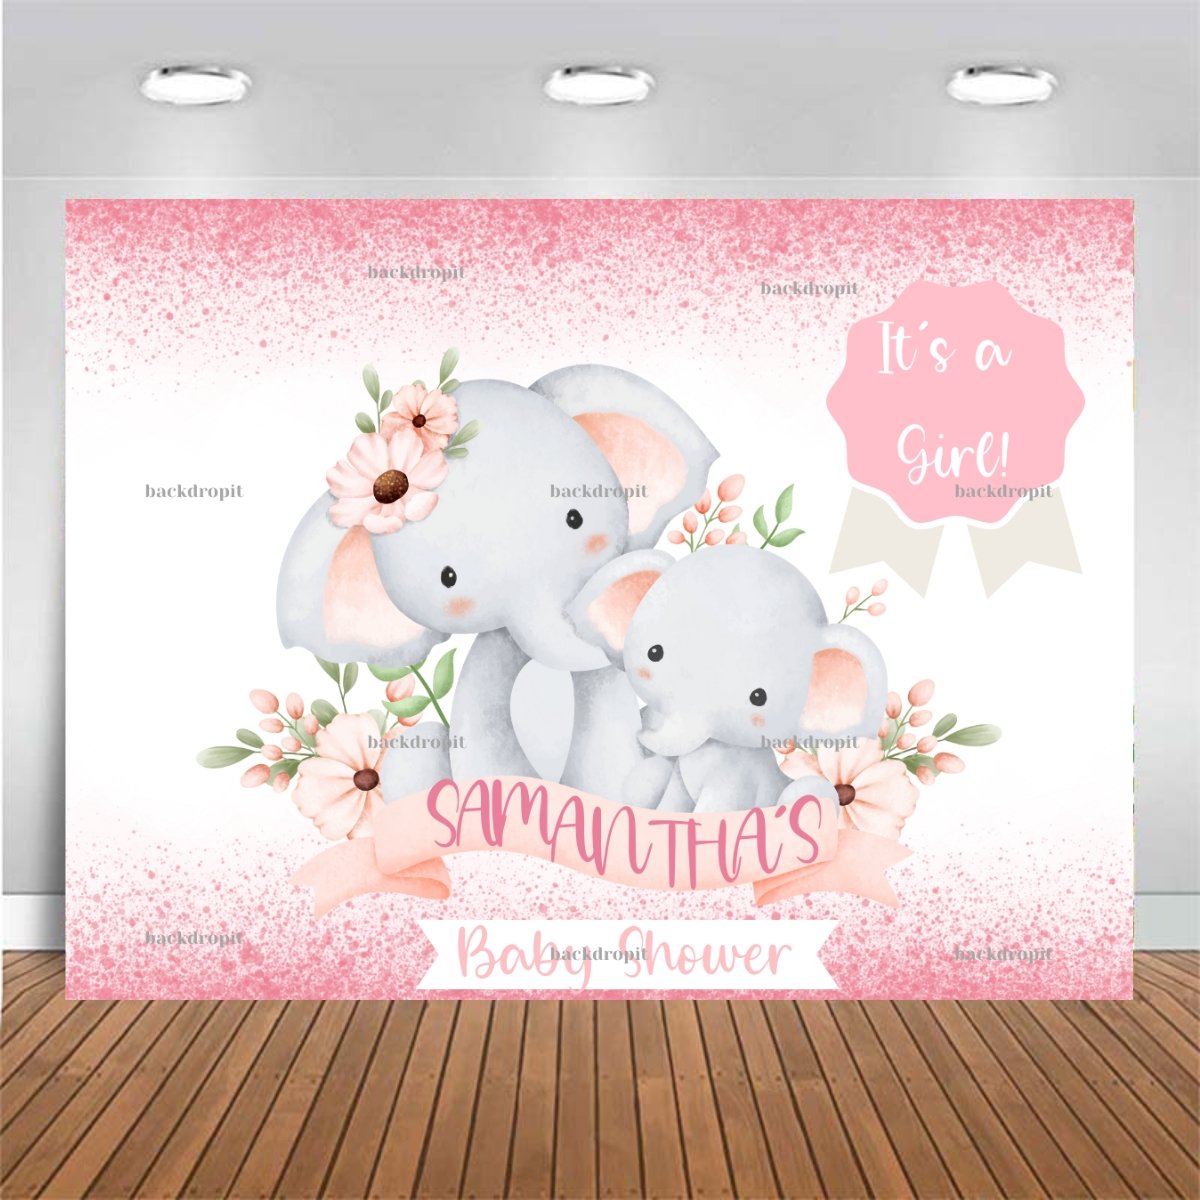 Customized Baby Shower Backdrop - It's a Girl!